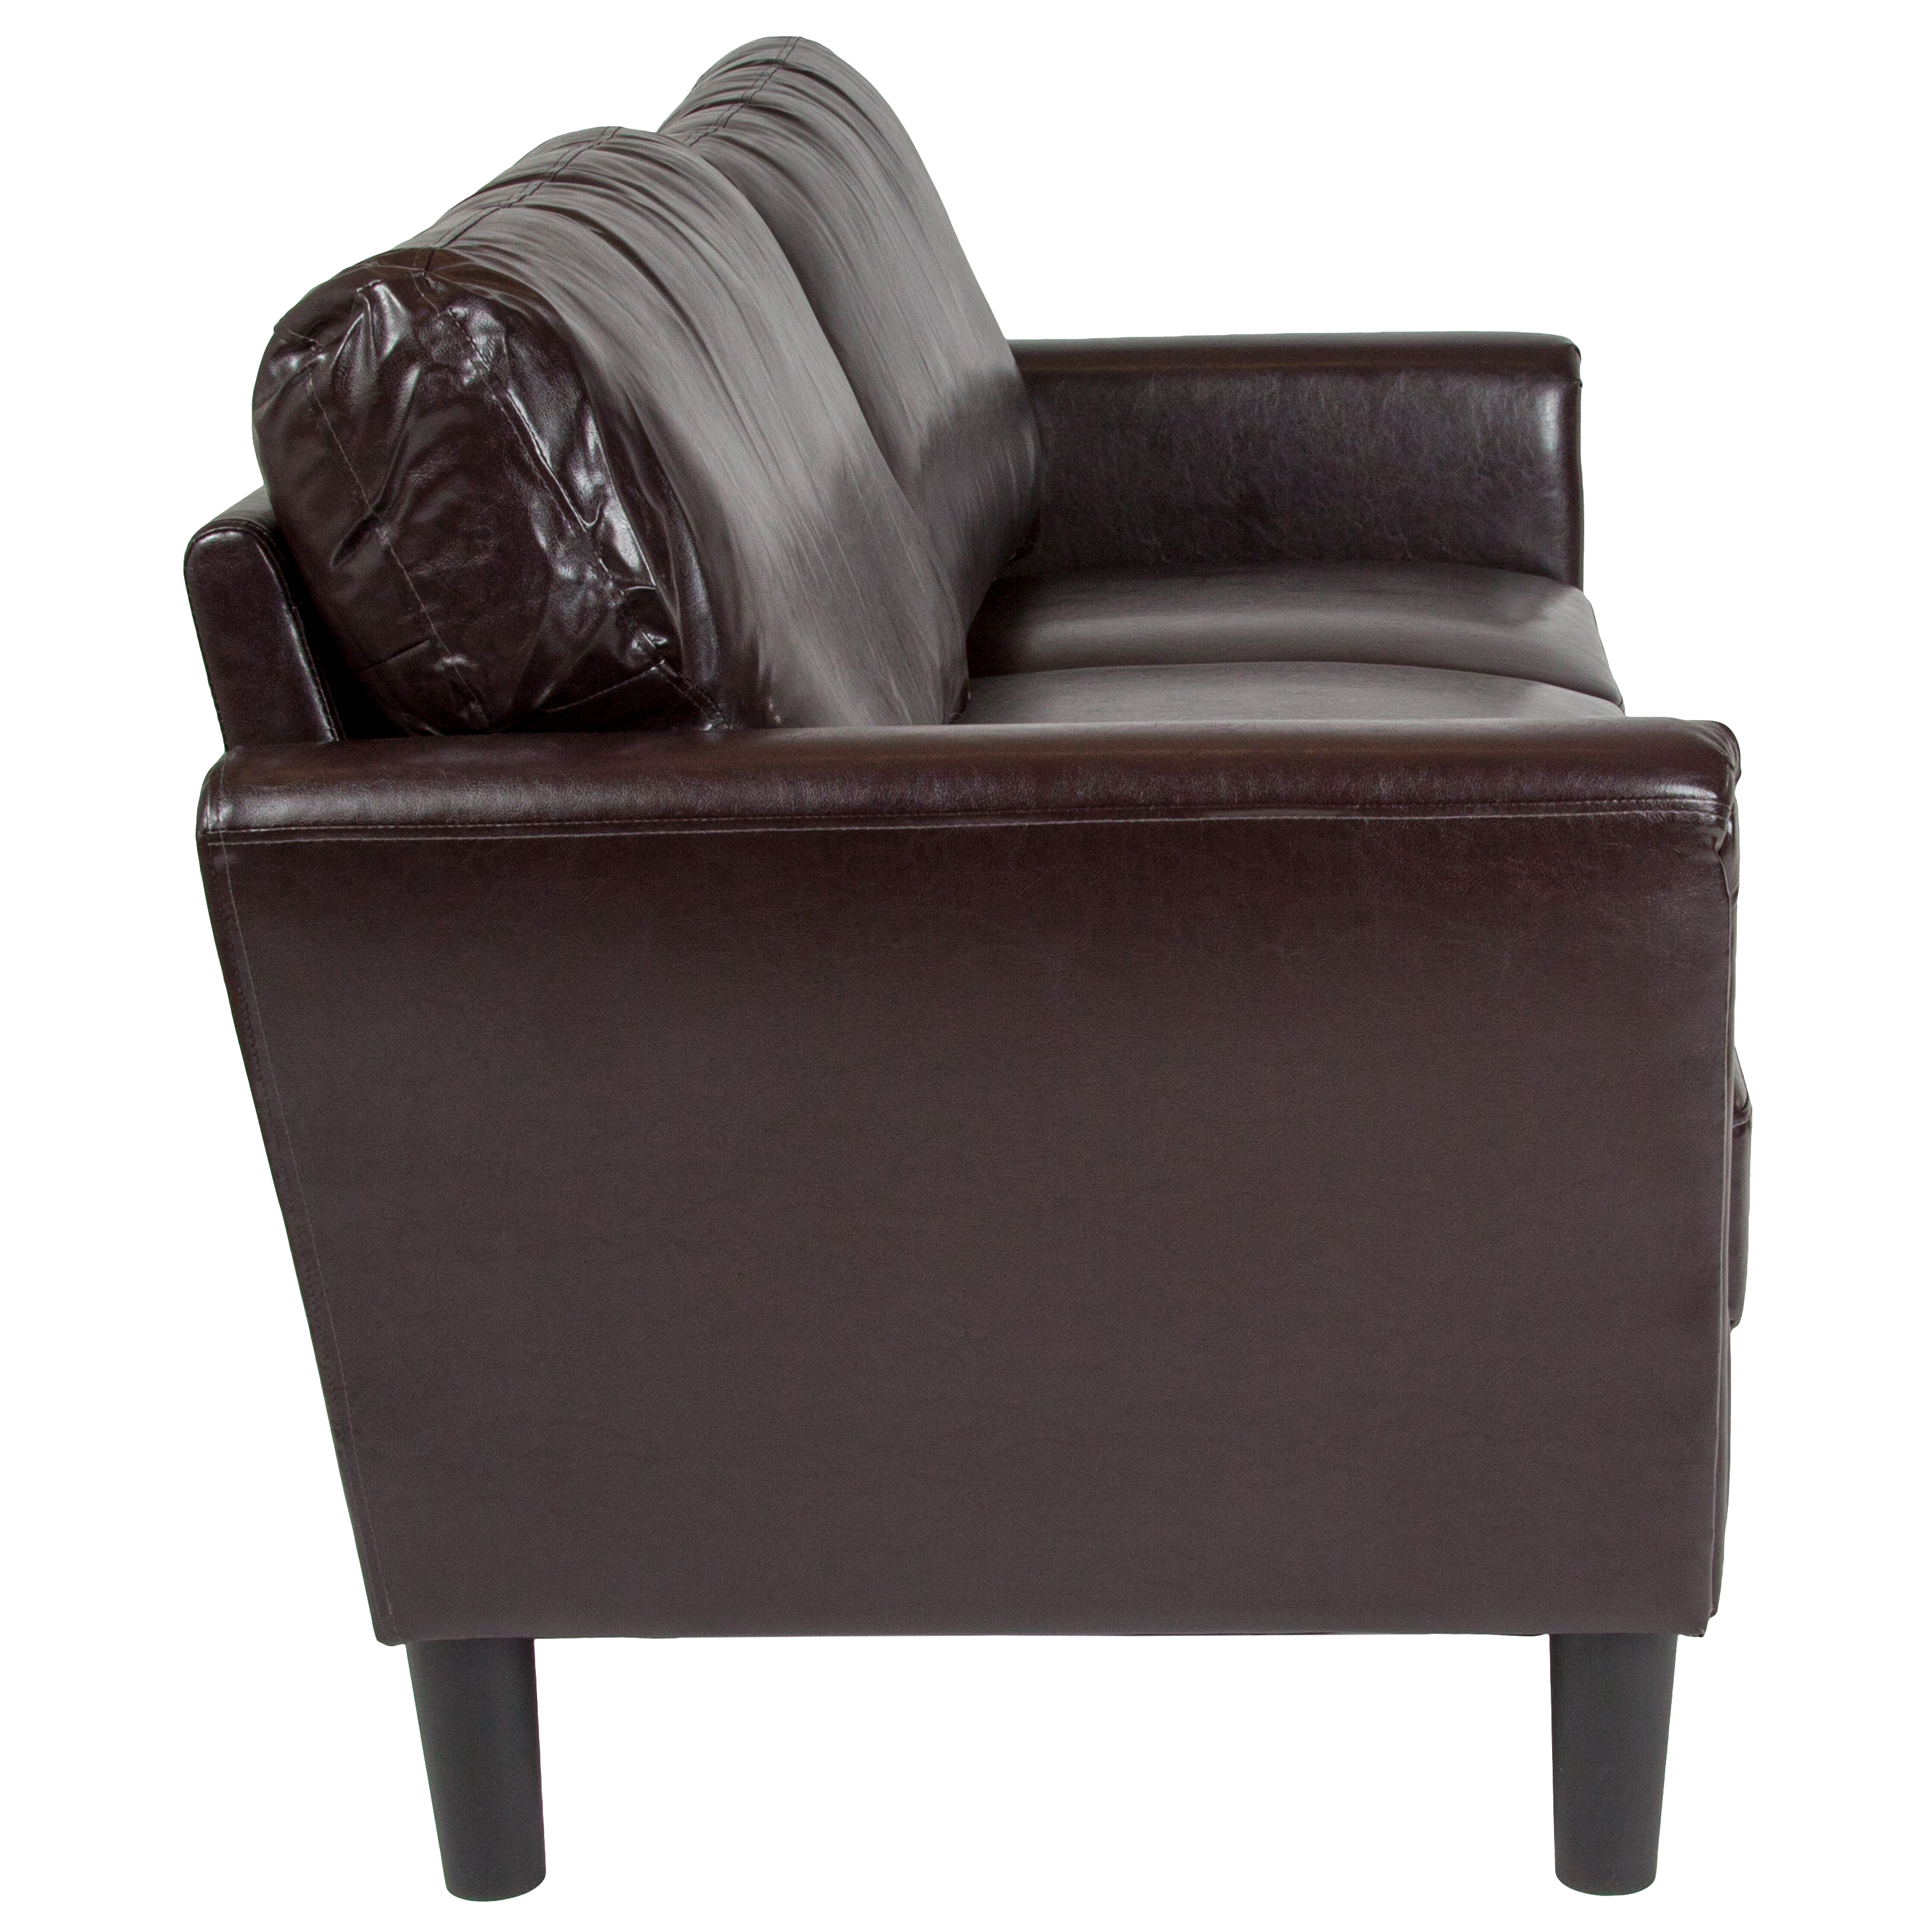 Flash Furniture Upholstered Living Room Sofa with Tailored Arms in Brown LeatherSoft - image 4 of 5